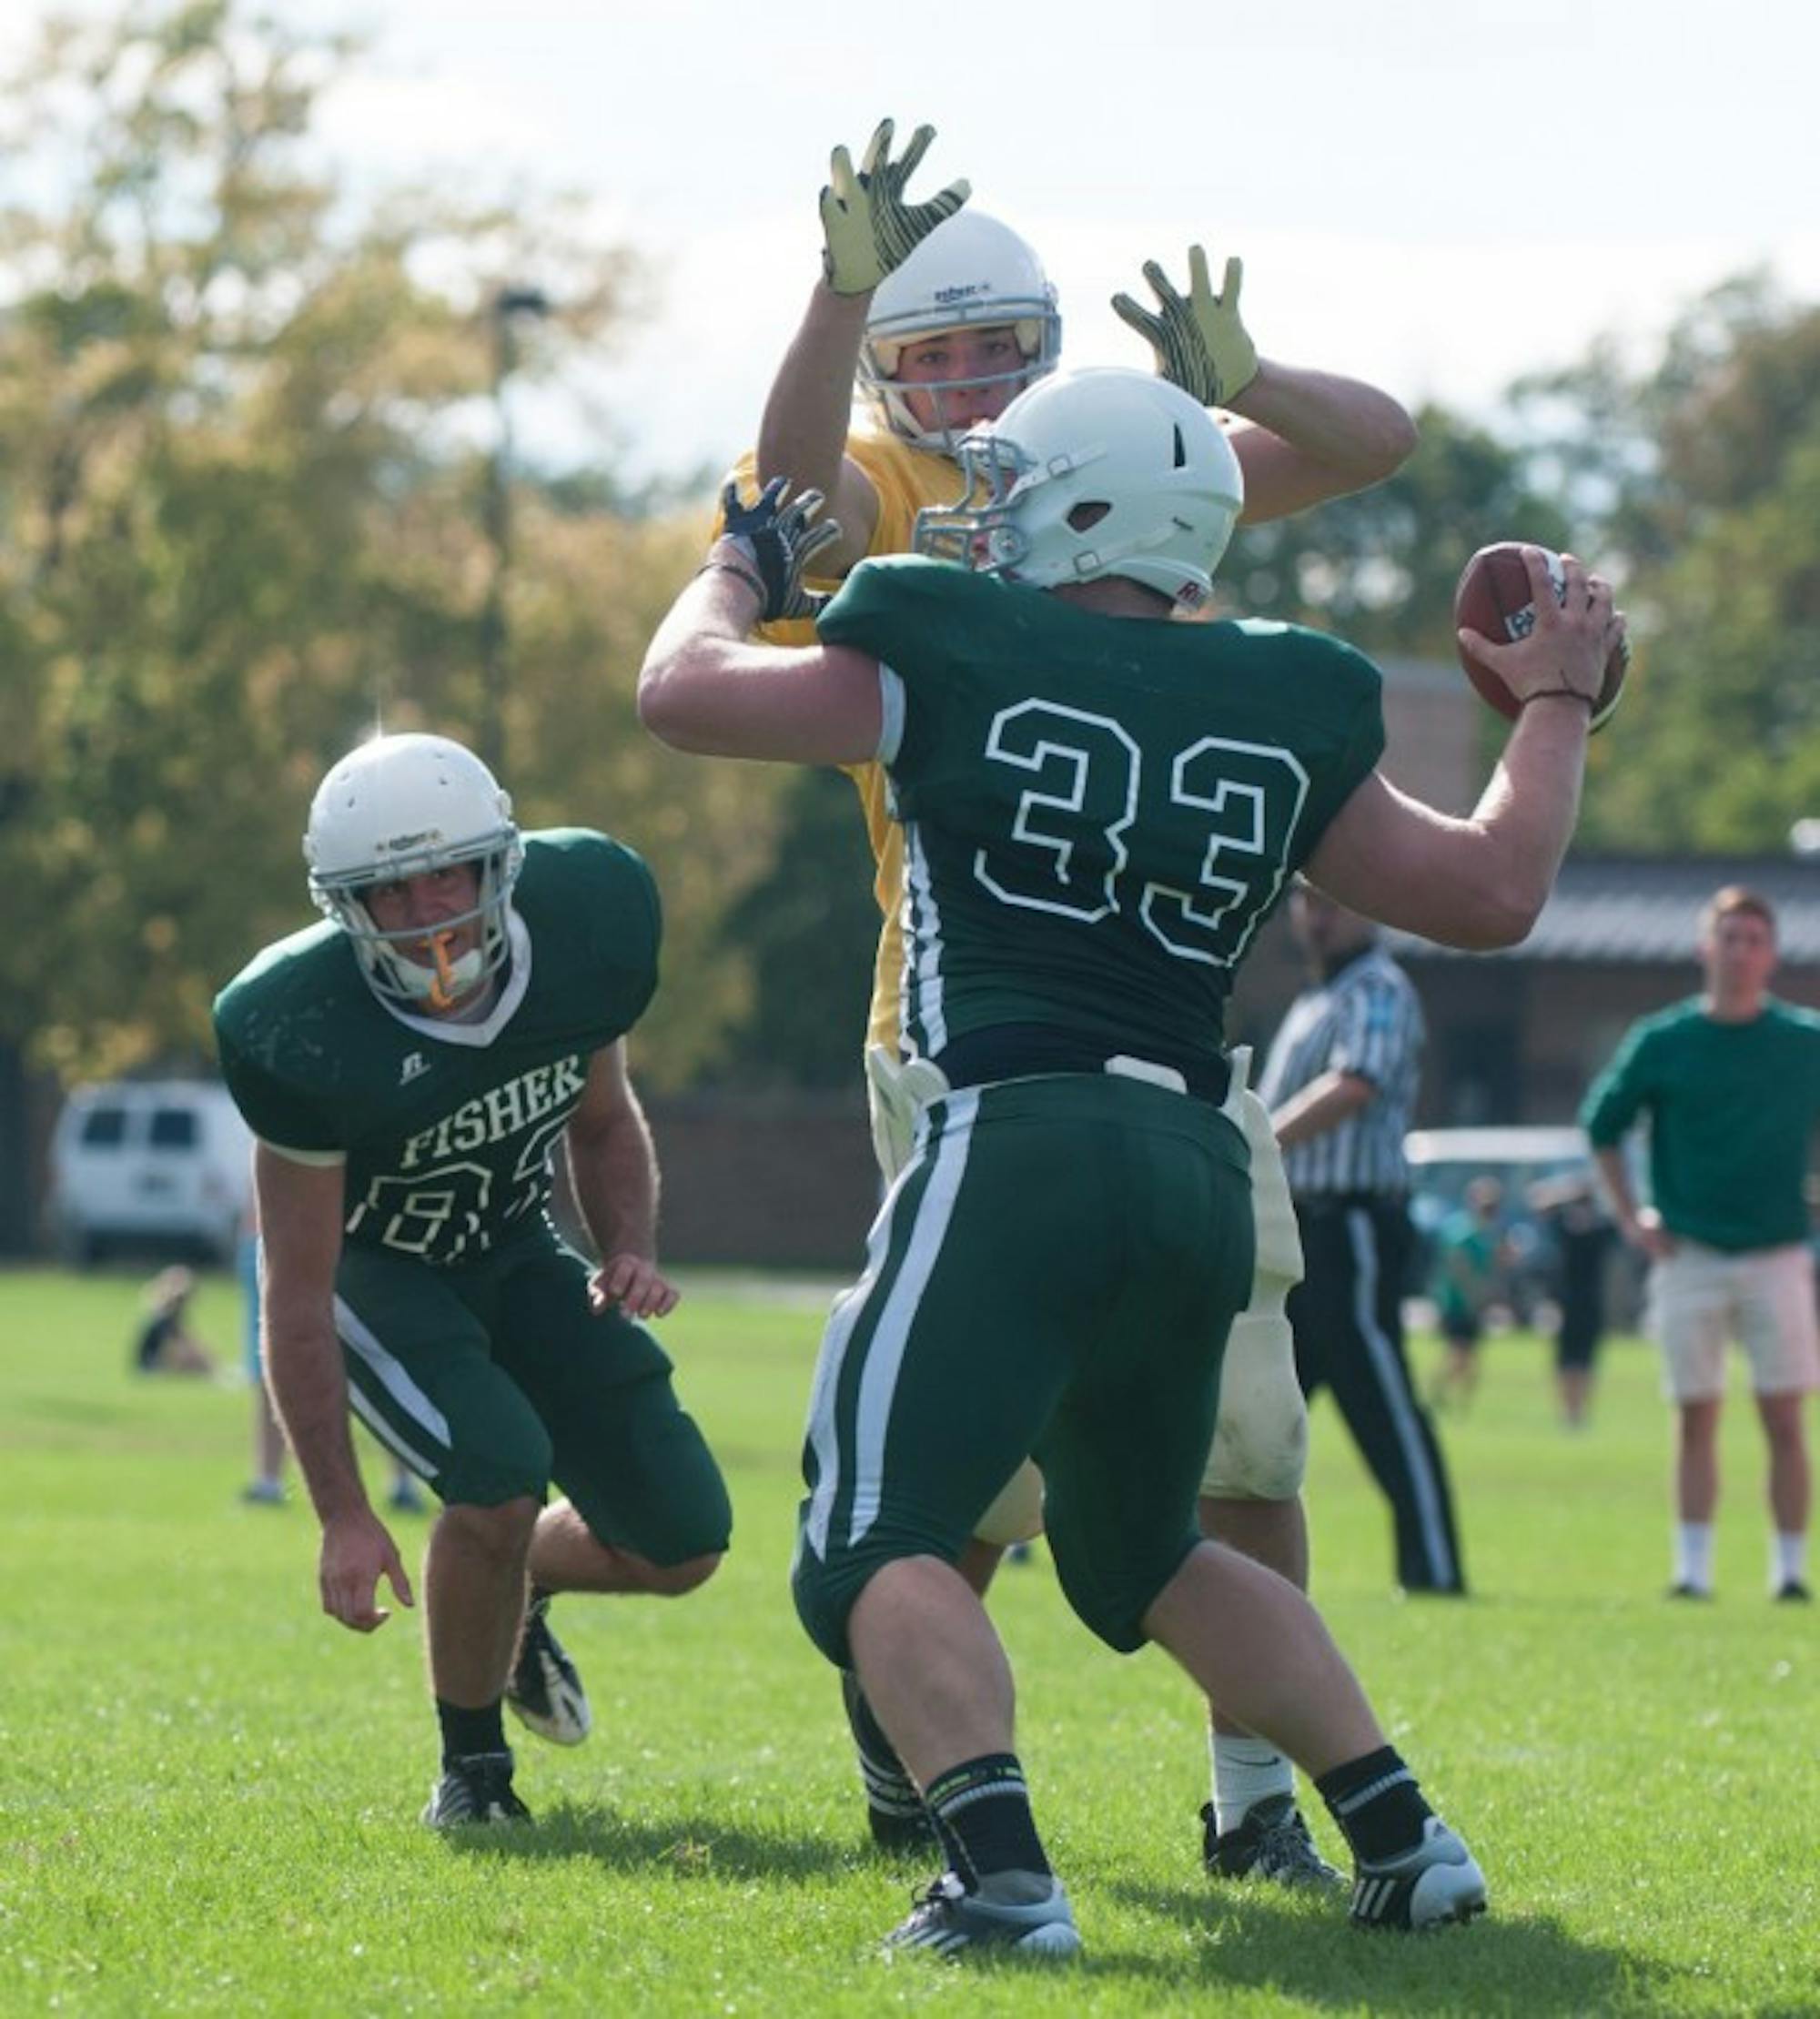 Junior Patrick Mazza of Sorin, defensive lineman, rushes the passer in a game last year. Mazza is now a varsity football walk-on.